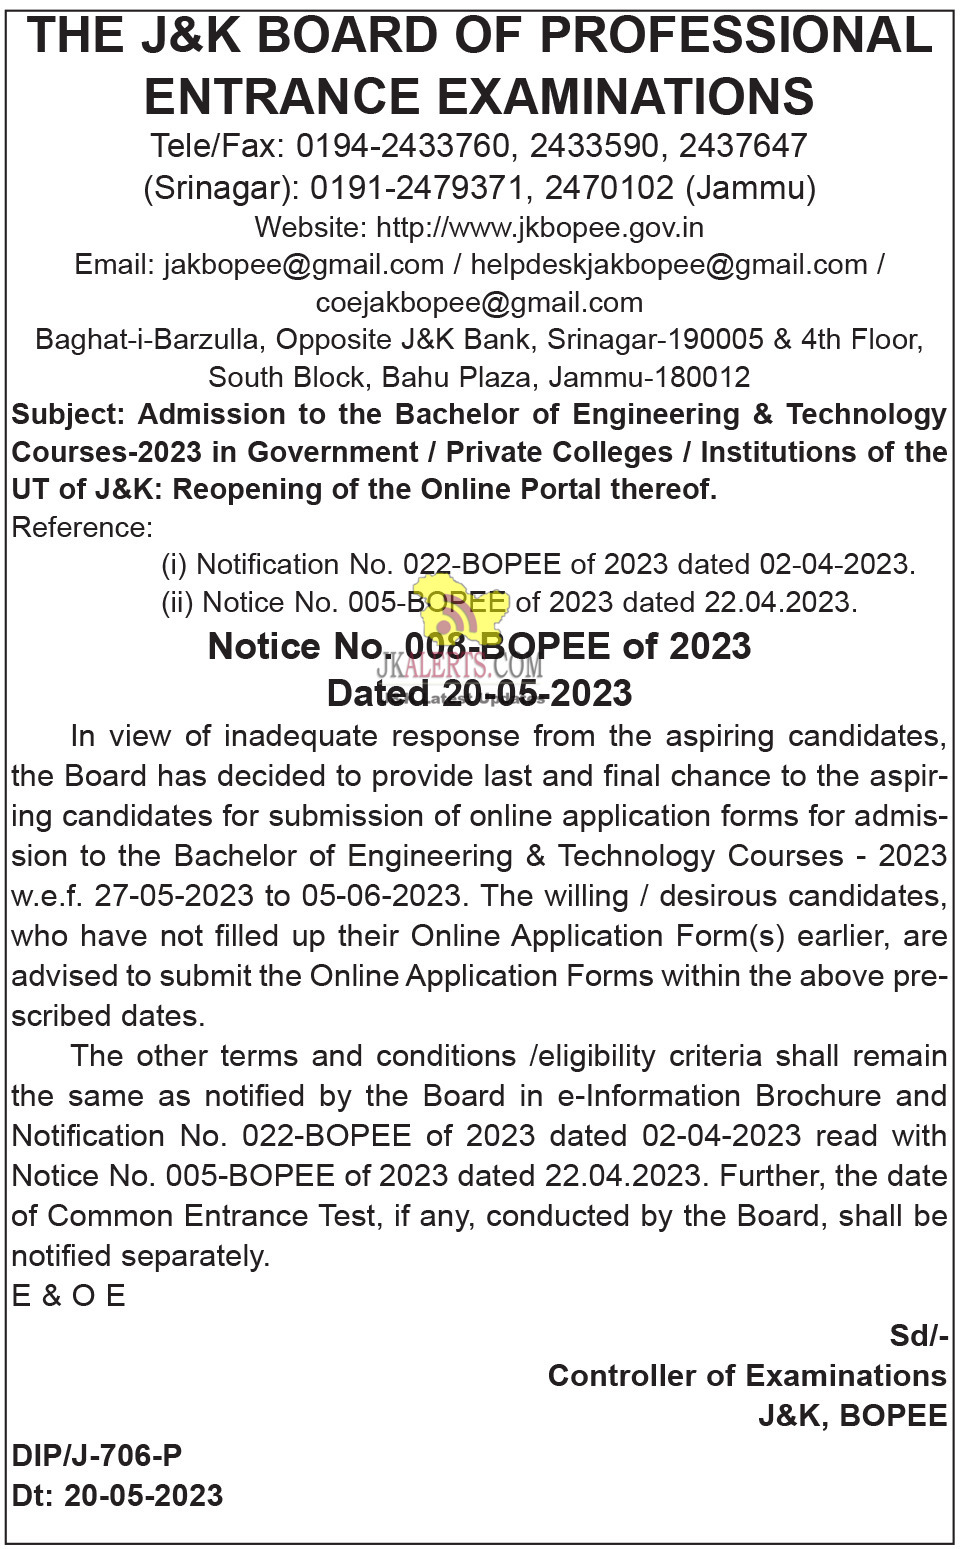 JKBOPEE Admission to Bachelor of Engineering & Technology Courses-2023.